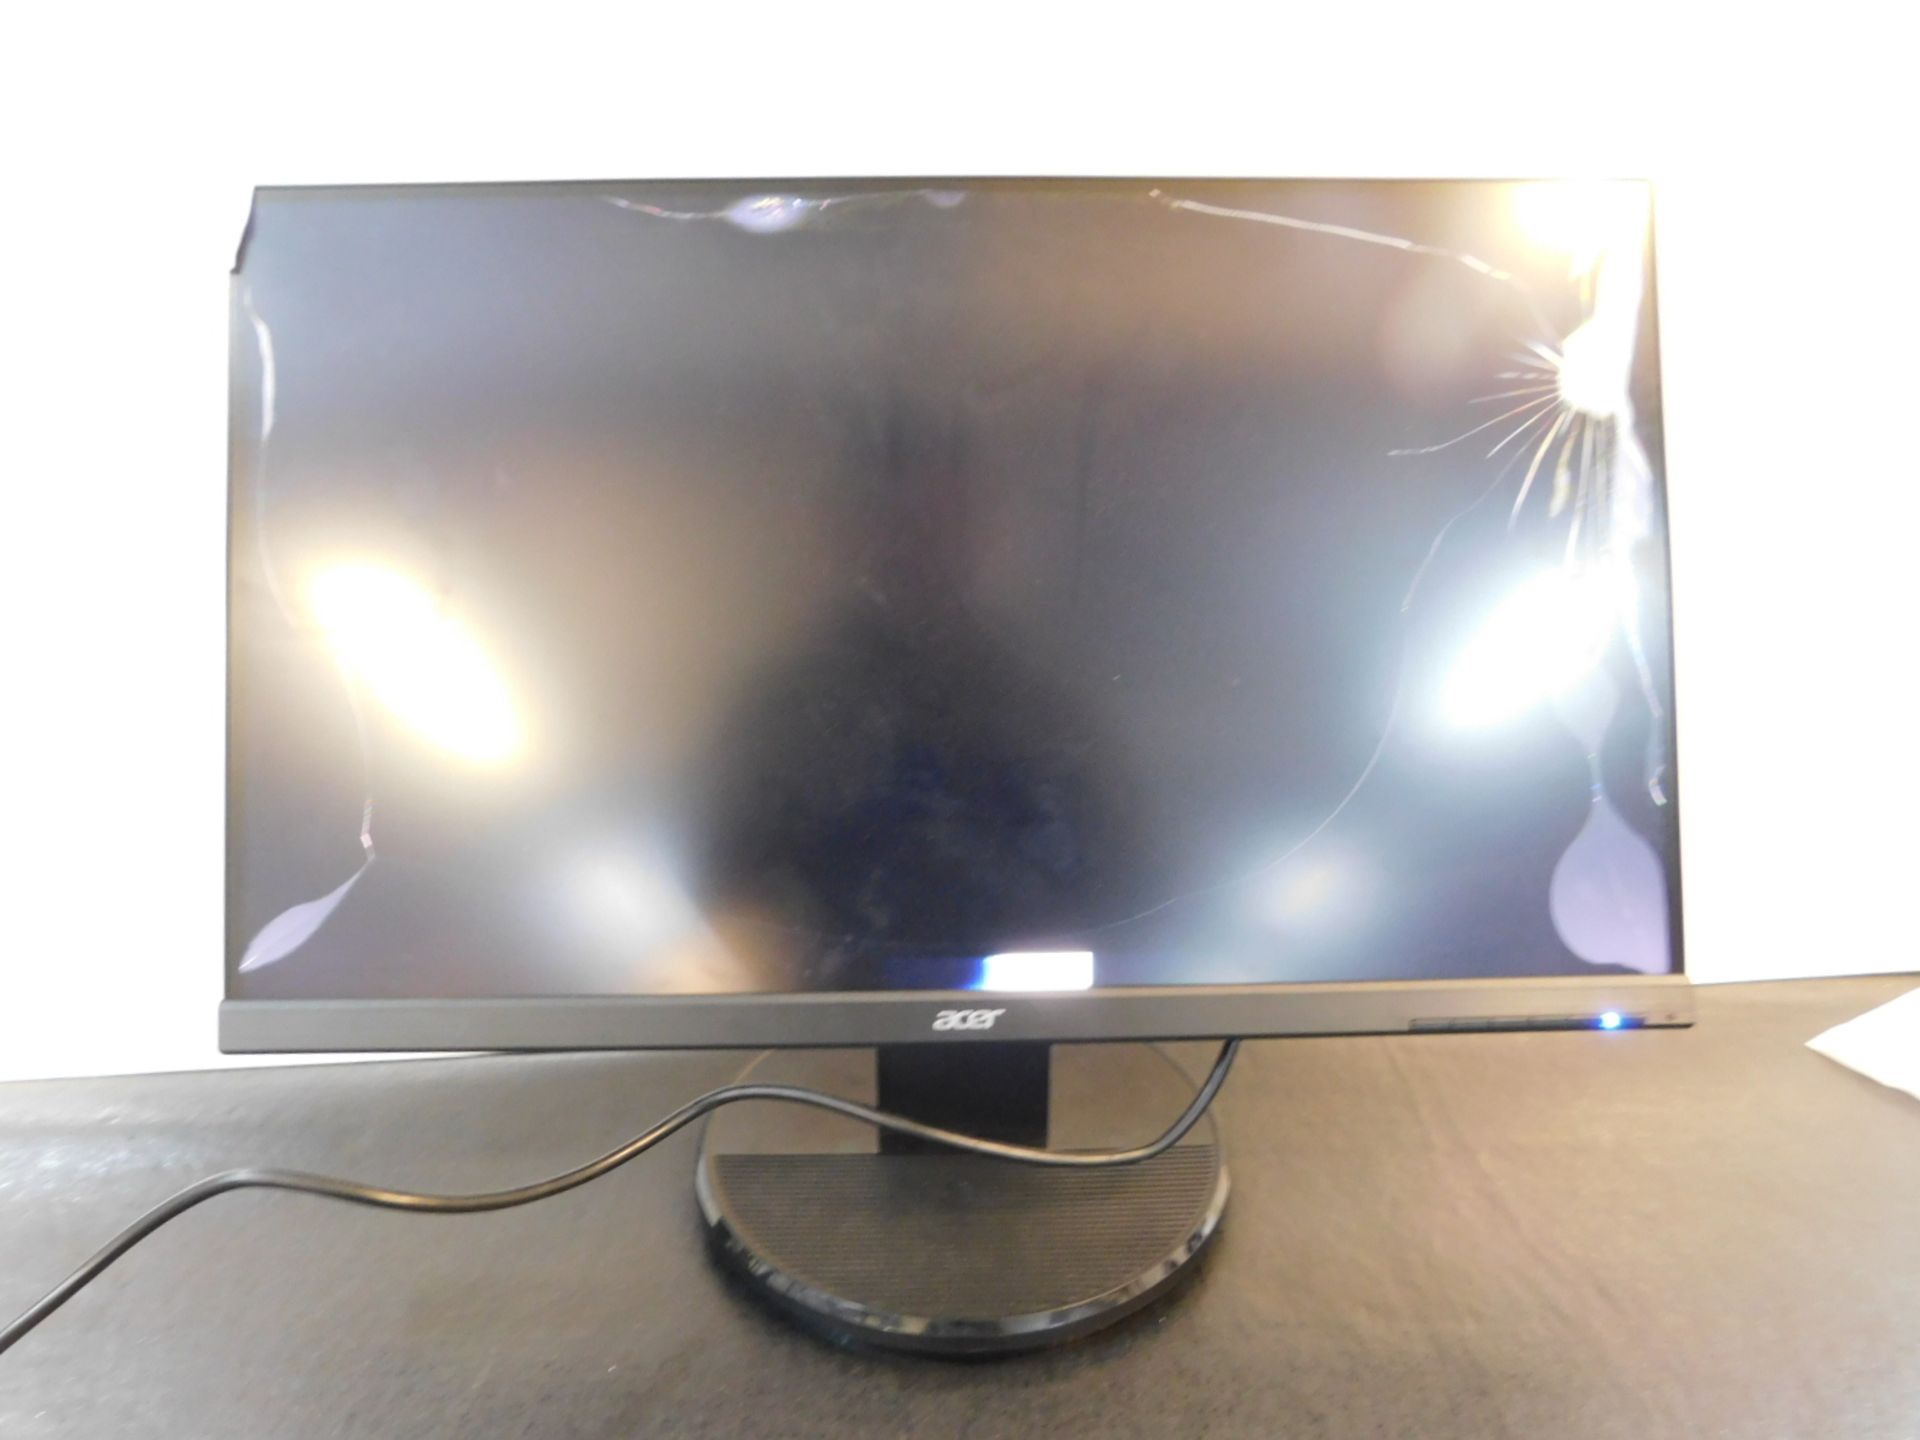 1 ACER 27" K272HL FULL HD MONITOR RRP Â£199 (SMASHED SCREEN)